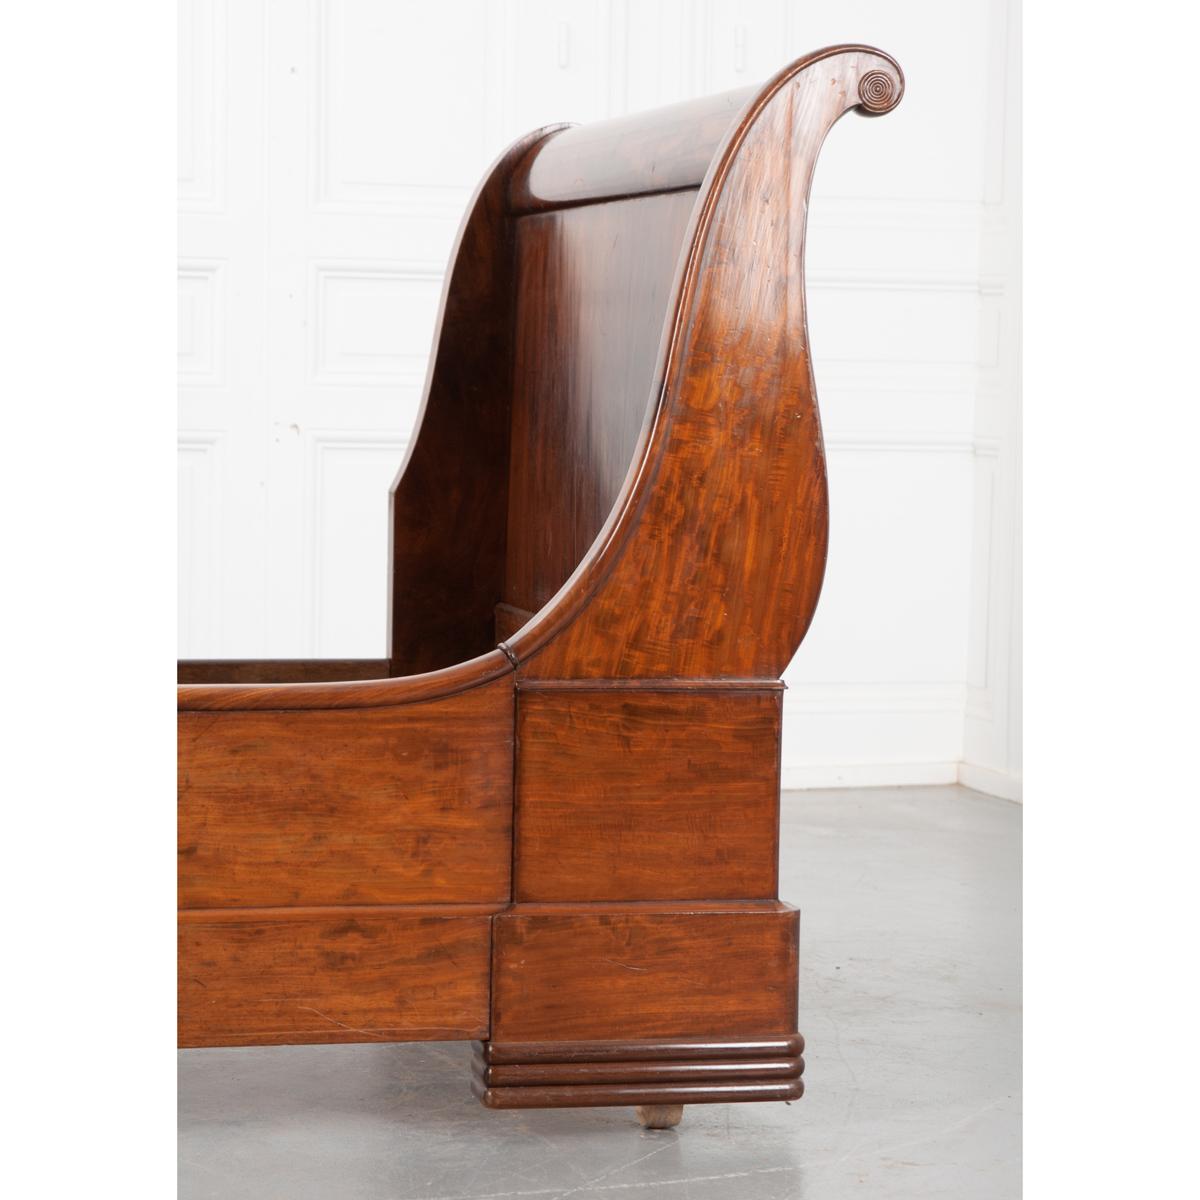 Other French 19th Century Mahogany Sleigh Bed